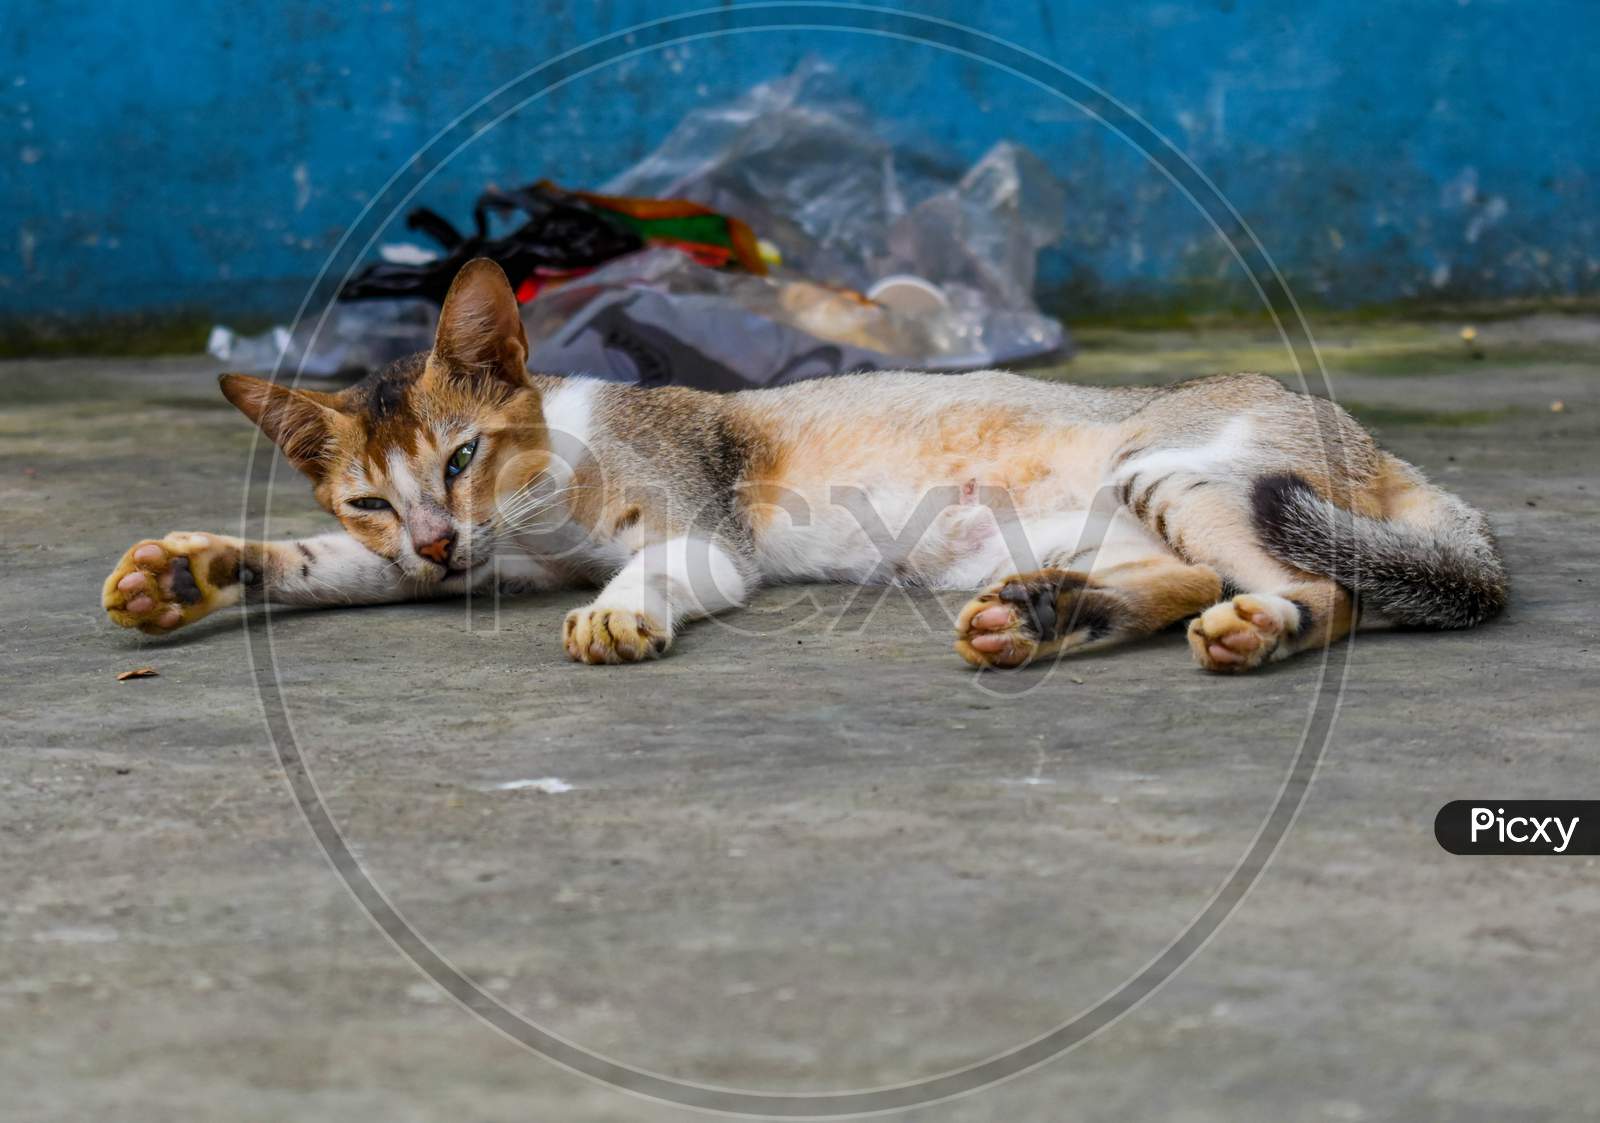 A Pet Cat Take Rest At Ground